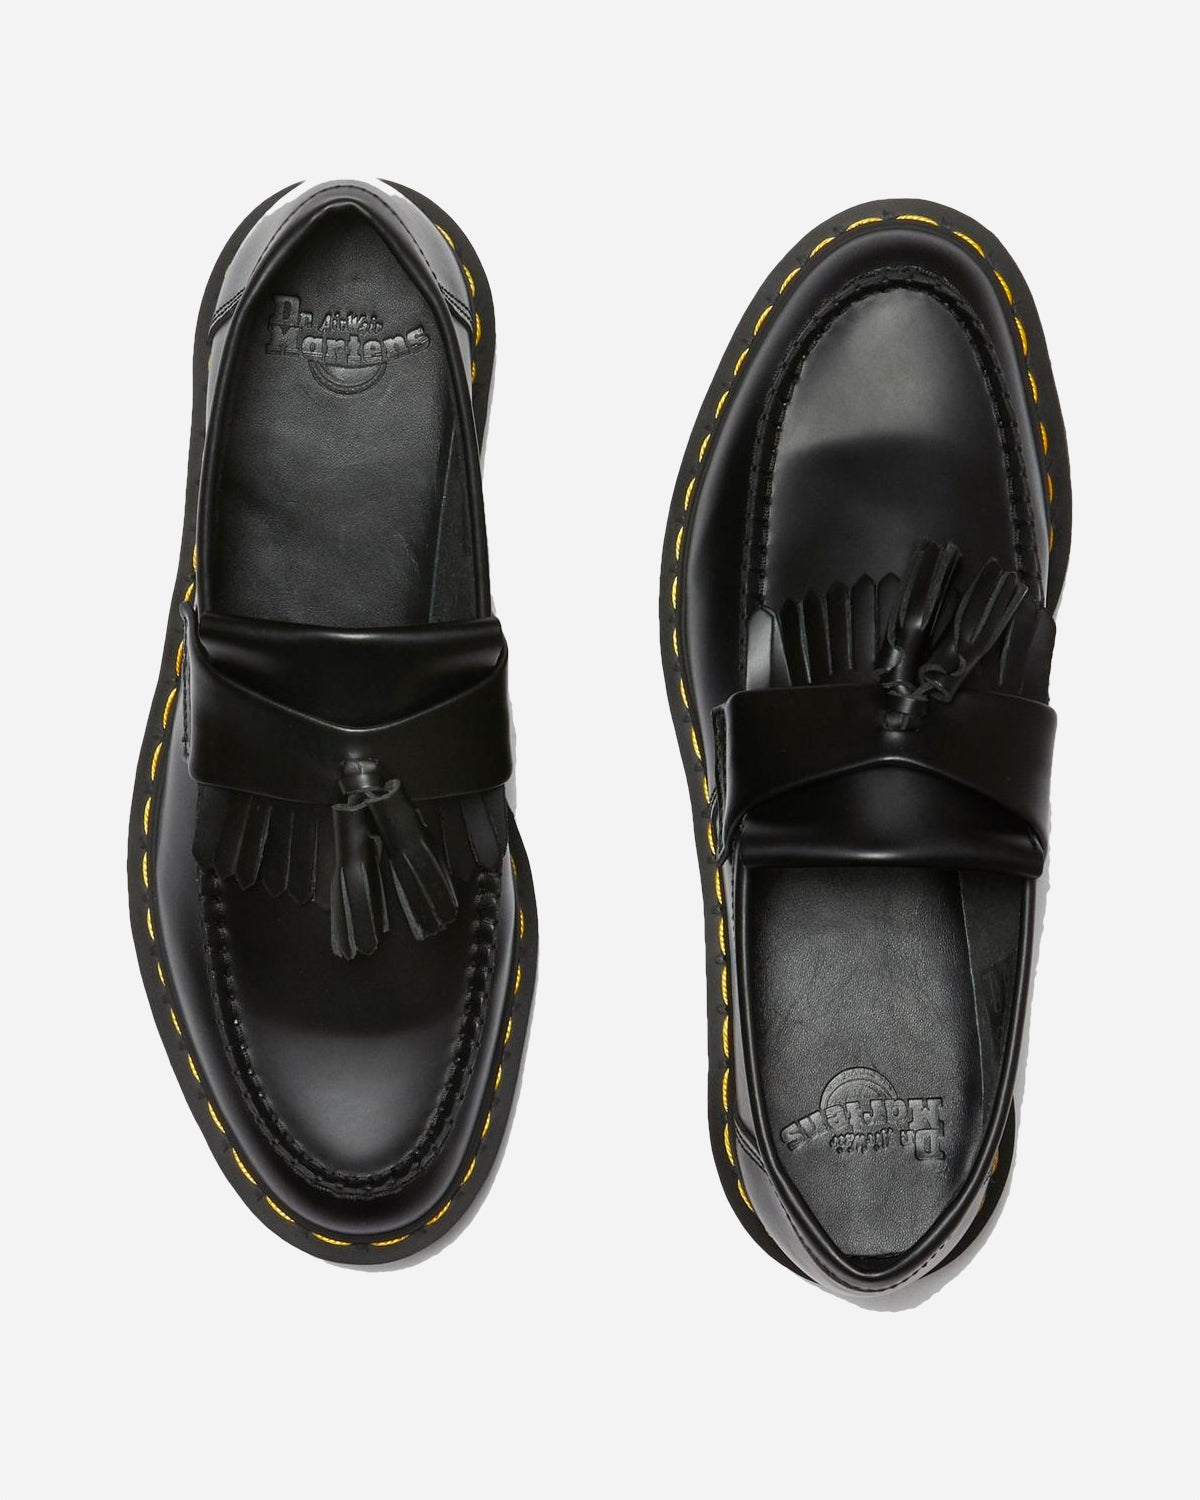 Adrian Smooth Leather Loafers - Black-Dr. Martens-Munk Store